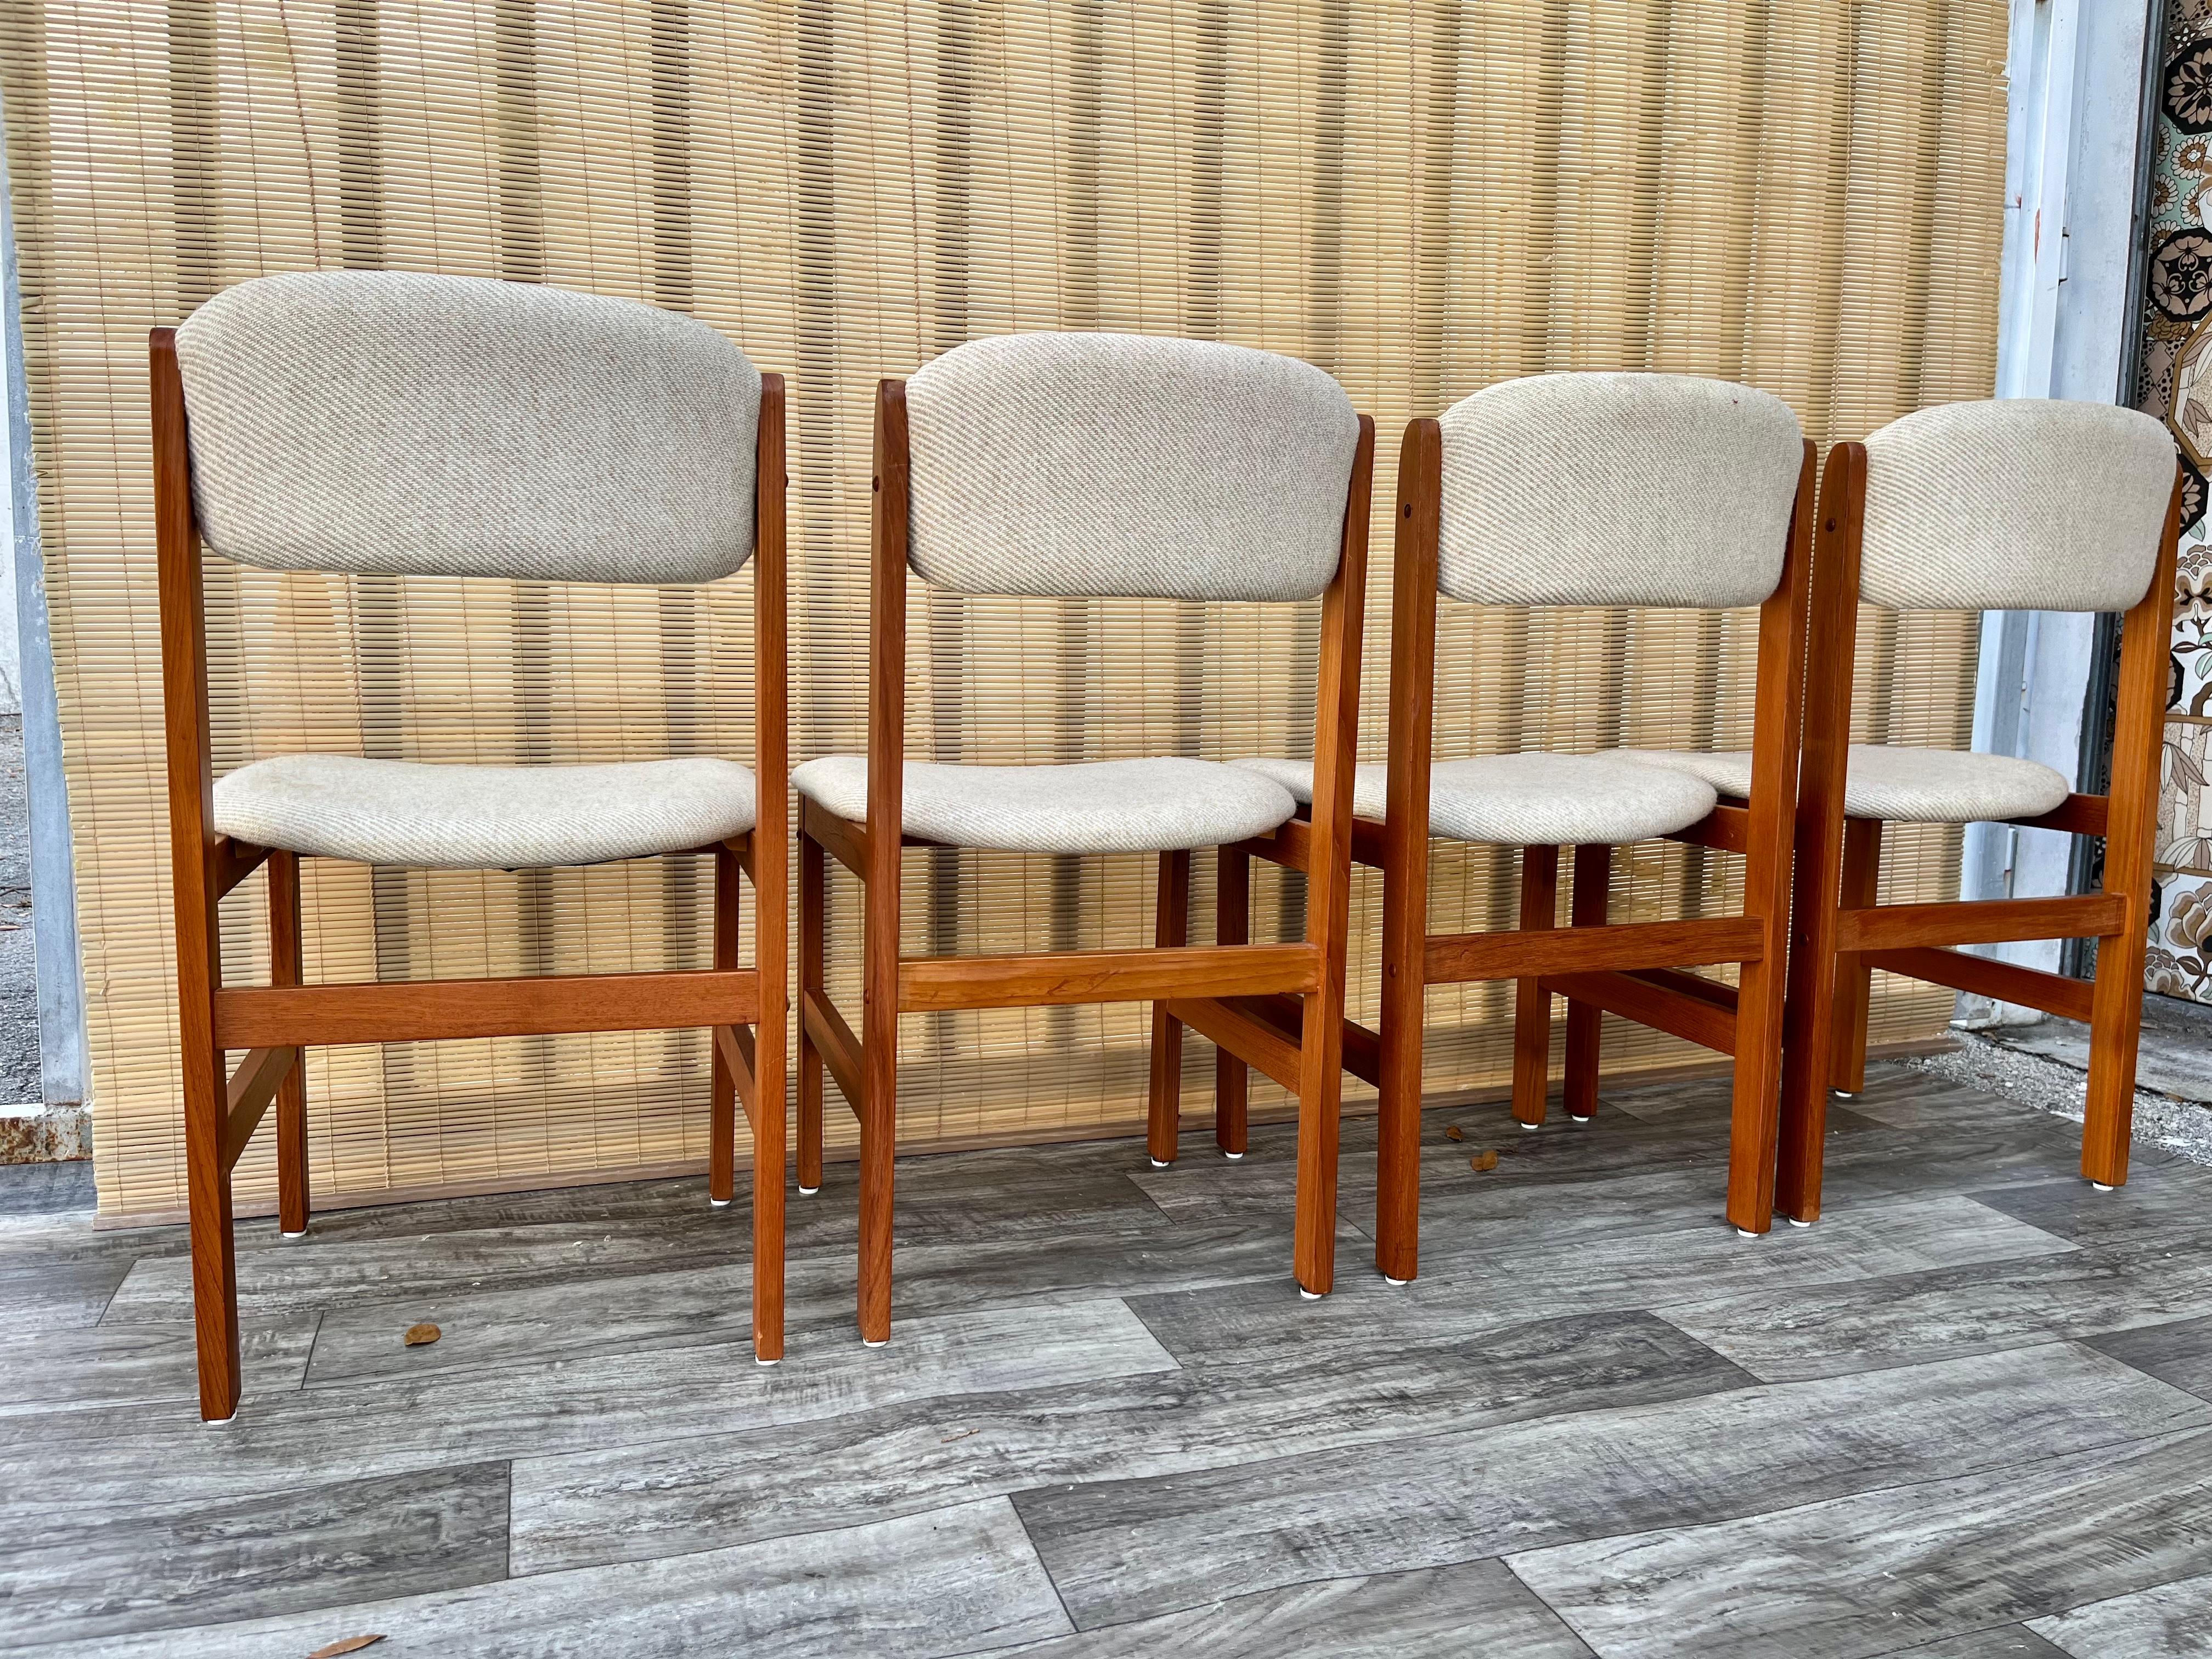 Scandinavian Modern Set of four Mid-Century Danish Modern Style Dining Chairs by Benny Linden Design For Sale